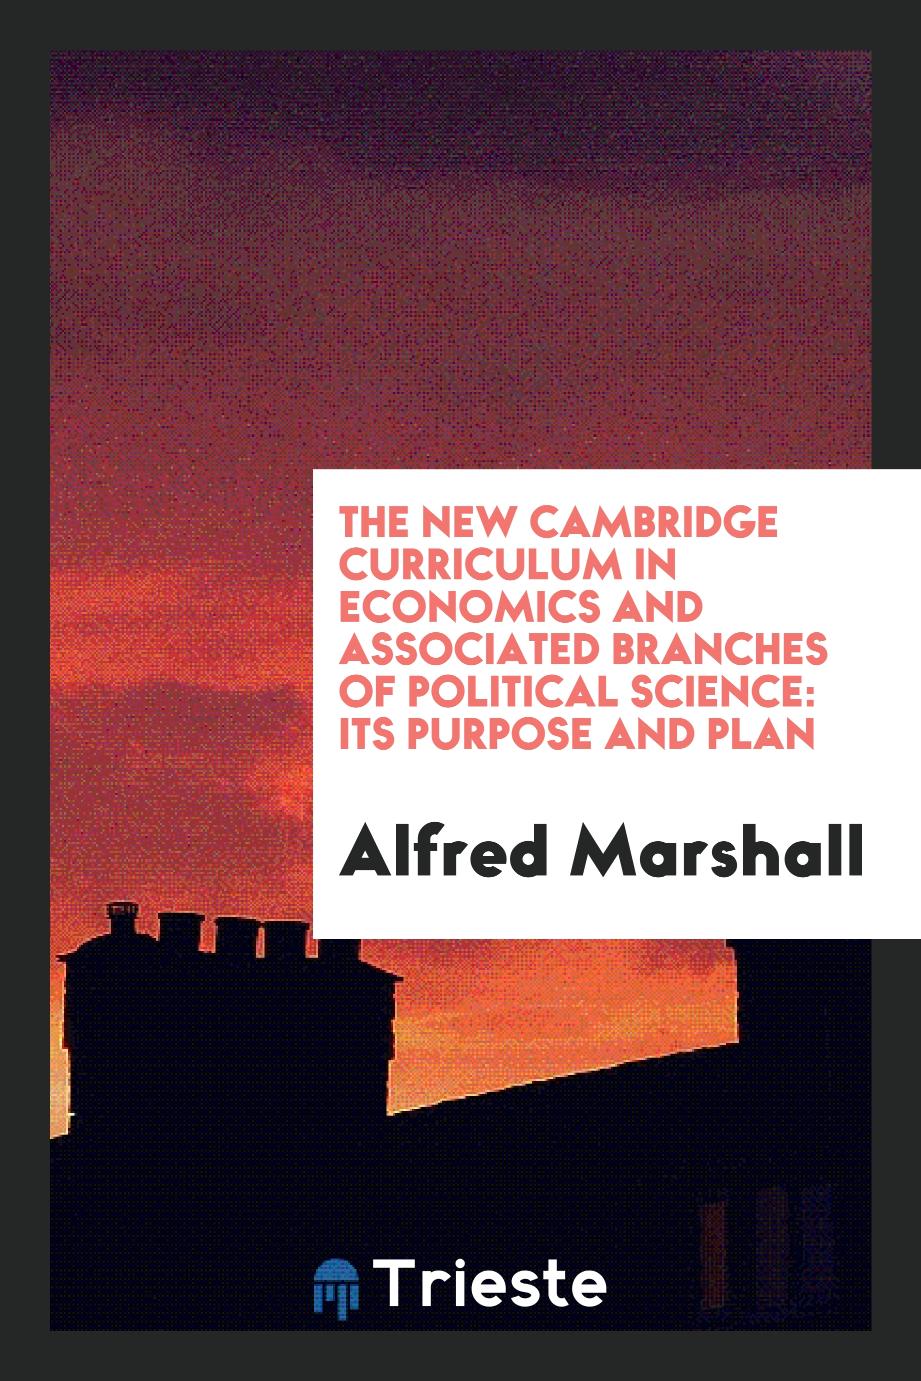 The New Cambridge Curriculum in Economics and Associated Branches of Political Science: Its purpose and plan